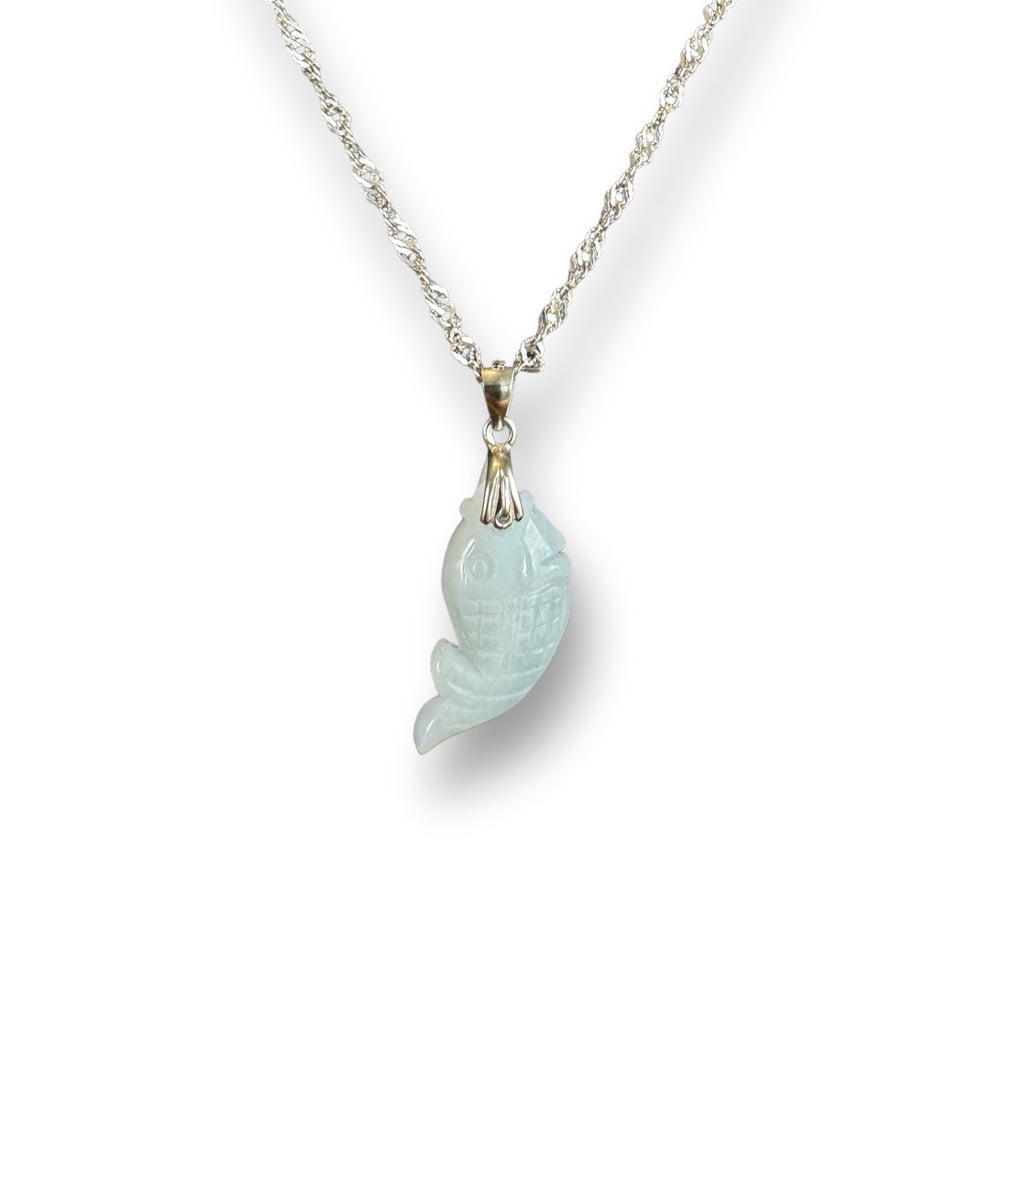 The Silver Lucky Fish Jade Necklace